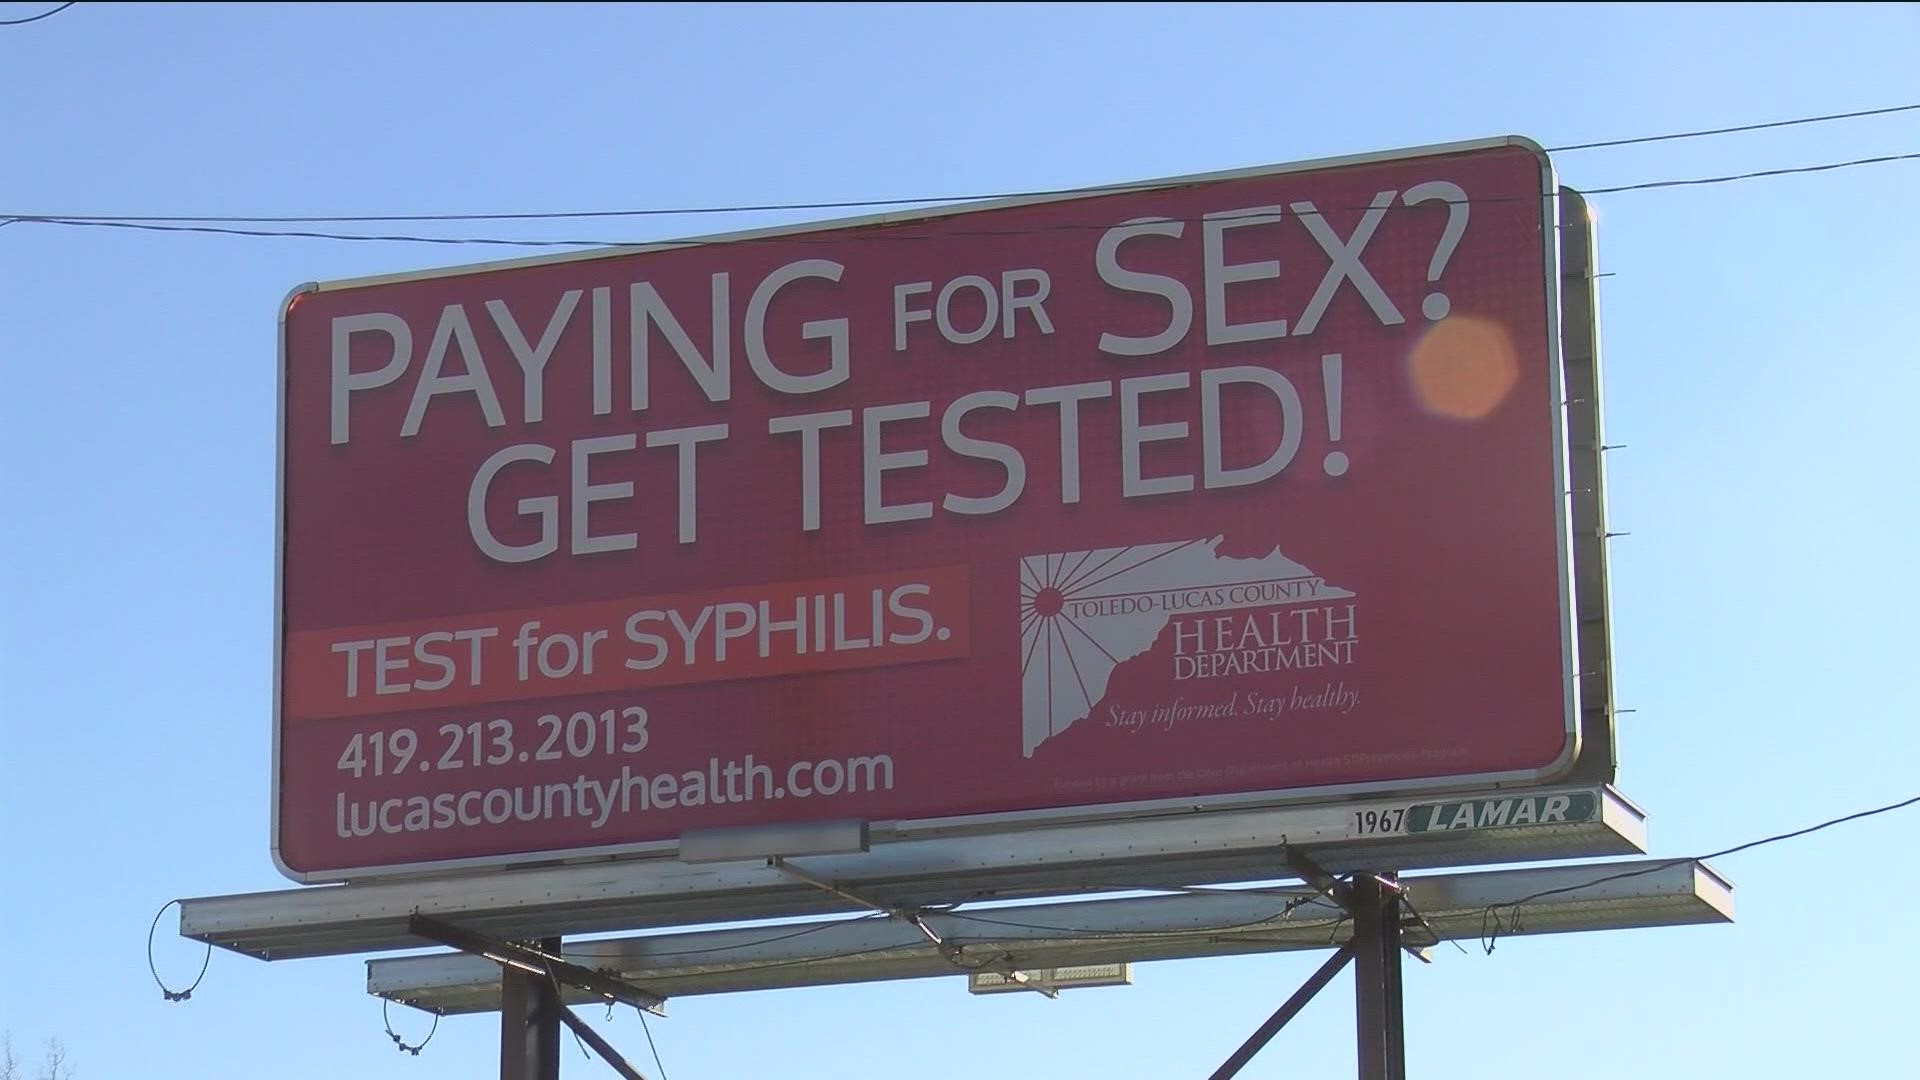 Toledo-Lucas County Health Dept is warning residents to get tested for sexually transmitted illnesses if they pay for sex.